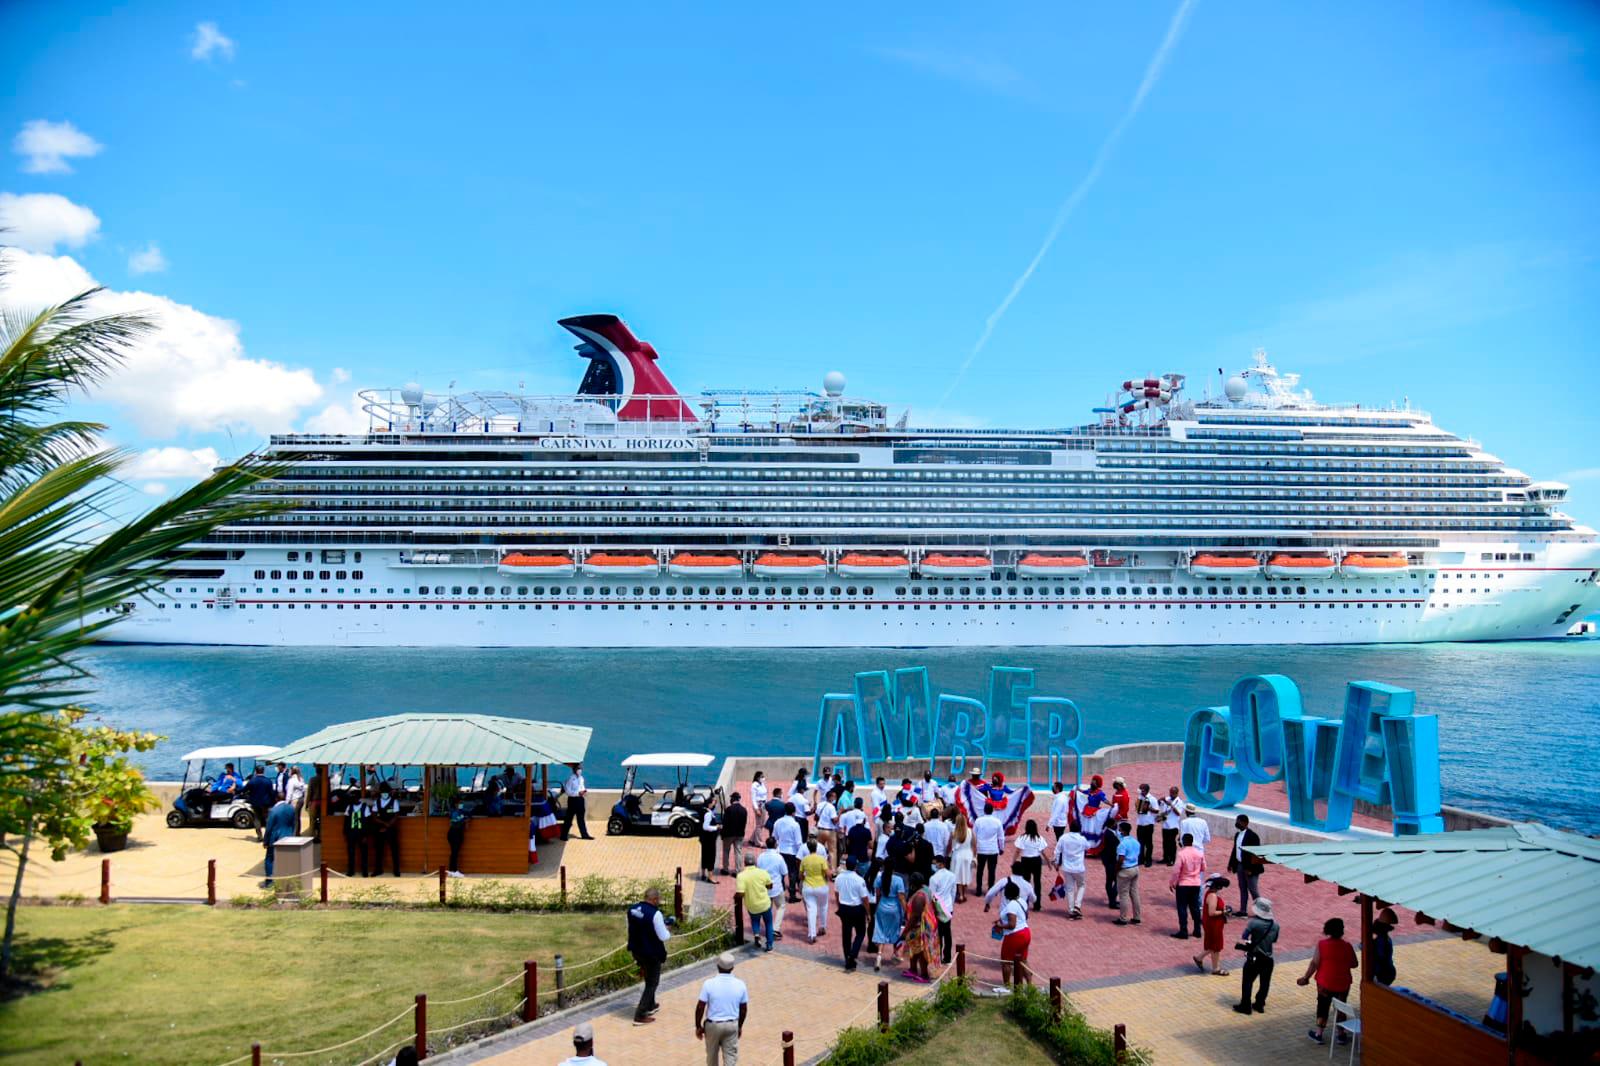 In only two days 7 cruise ships bring 11,700 visitors to Puerto Plata’s